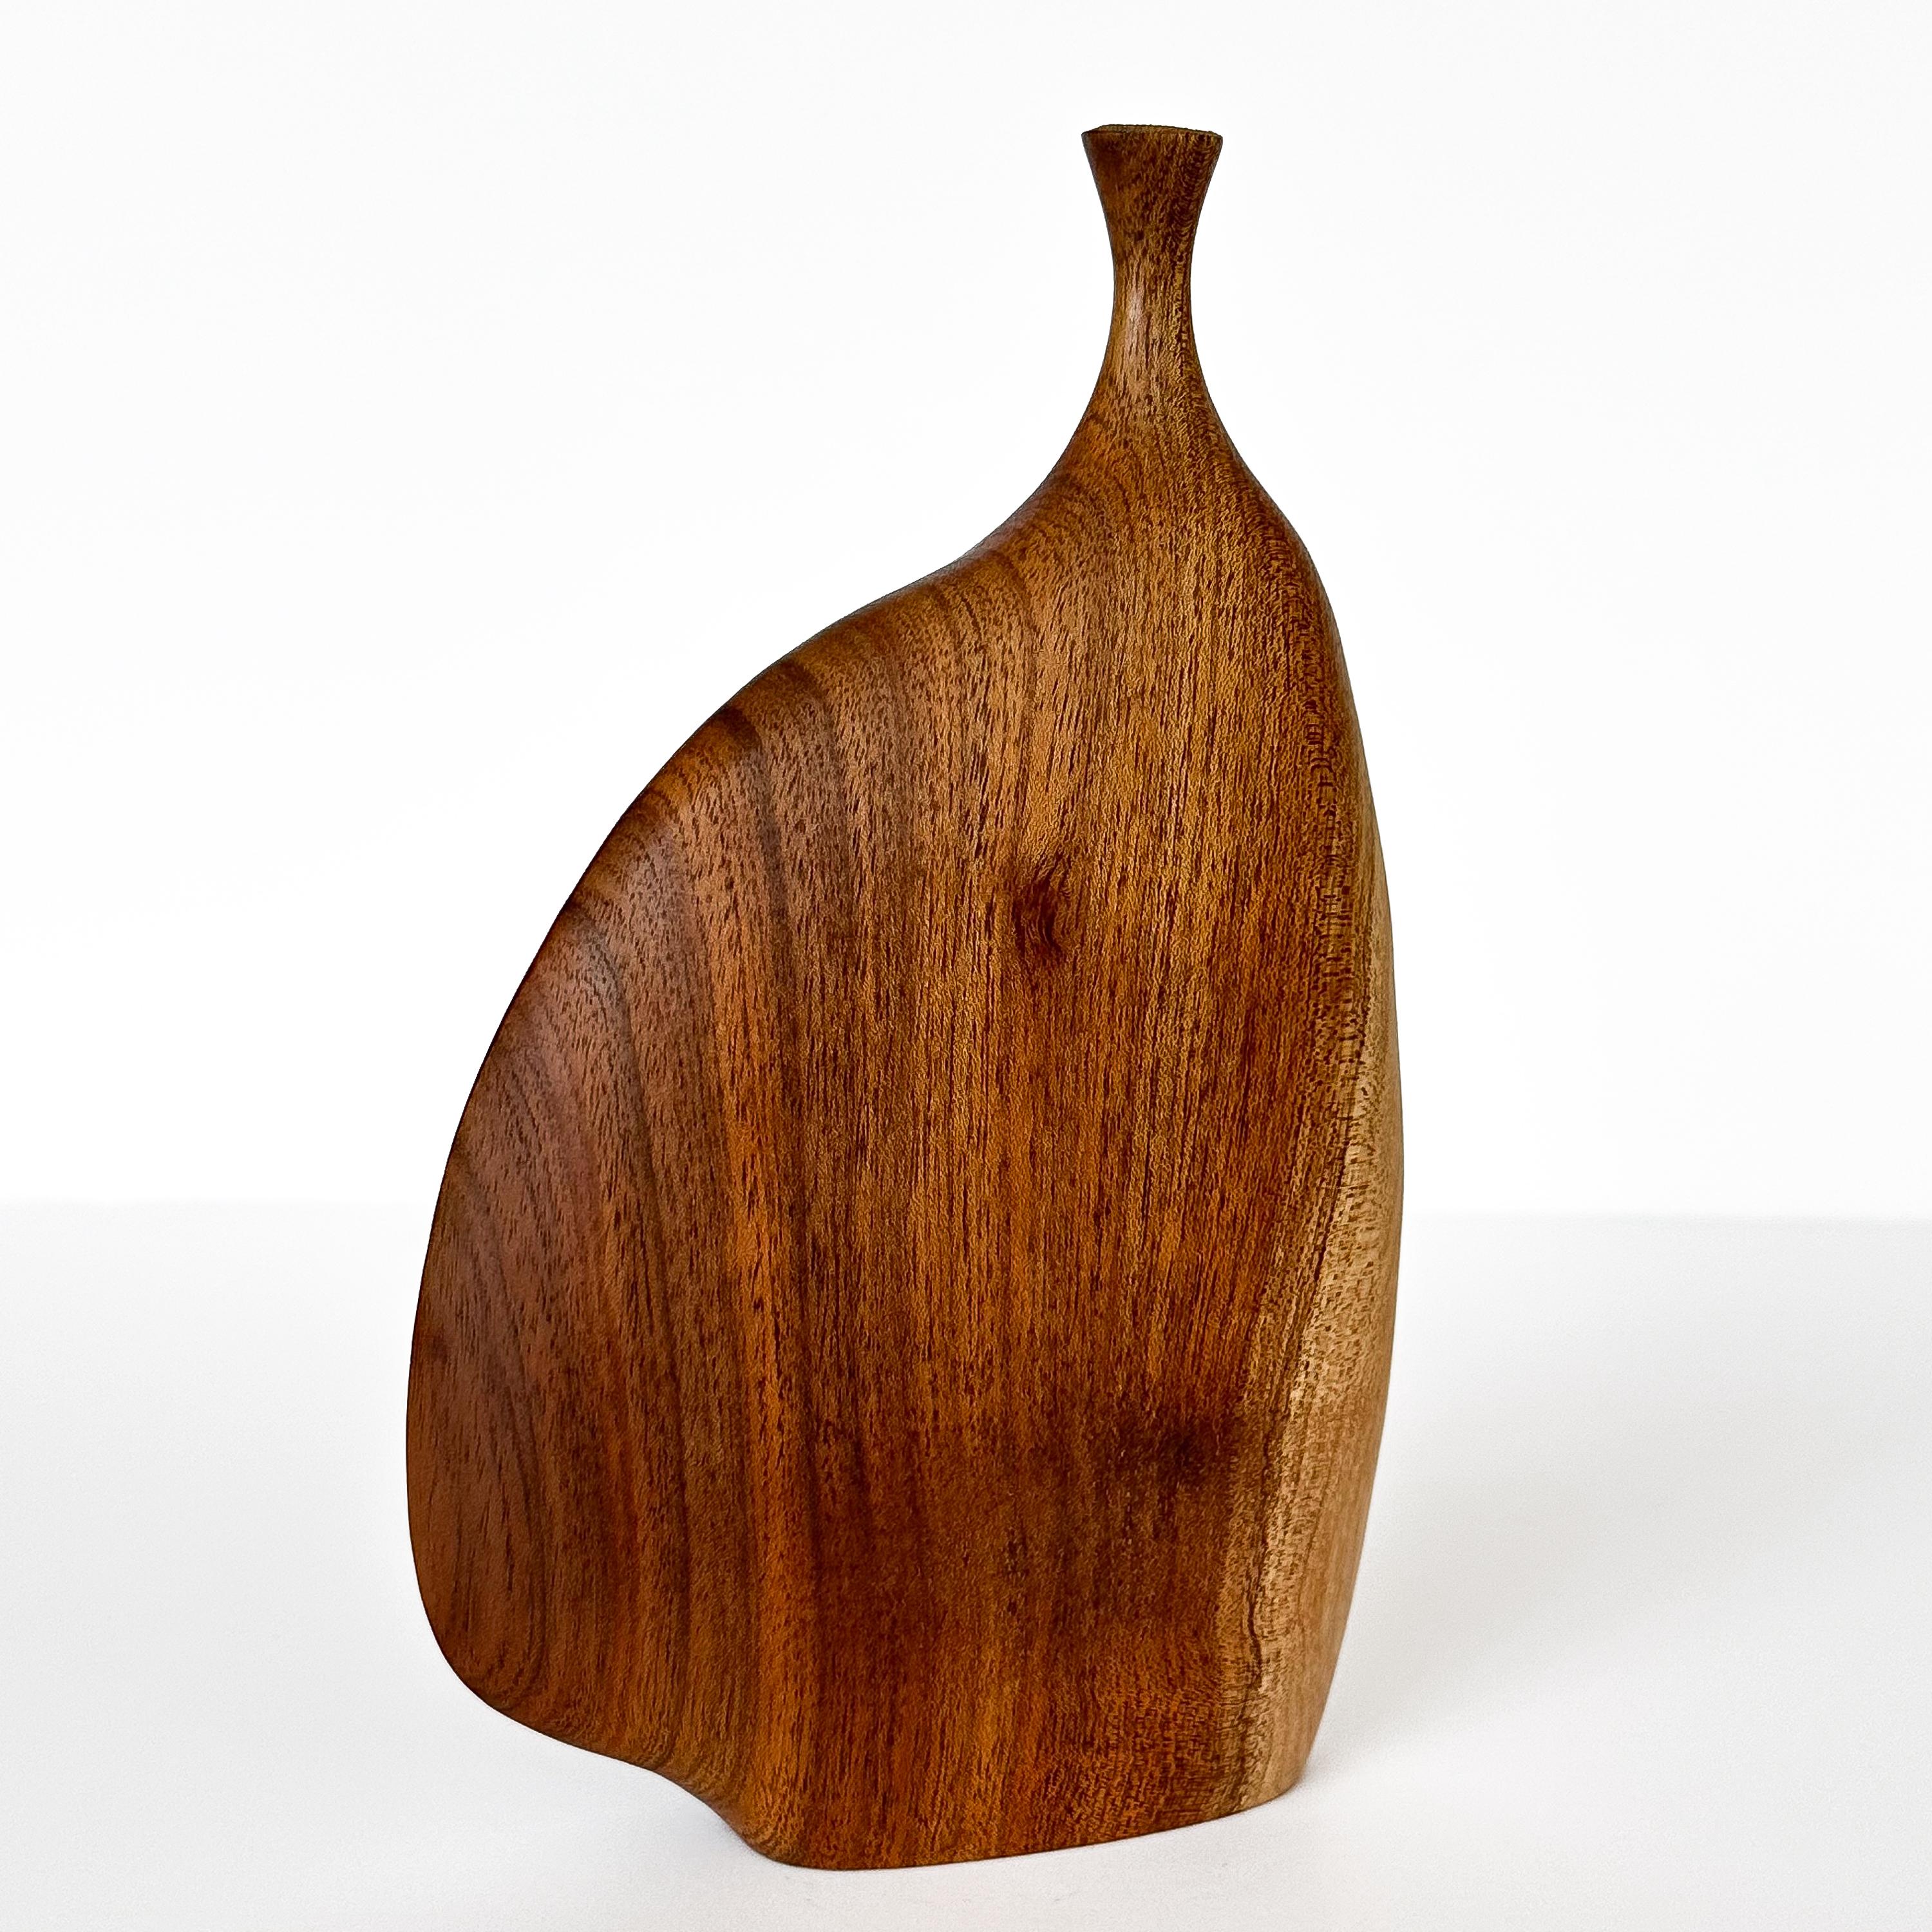 Introducing an extraordinary sculpted wood-turned weed vase by the acclaimed American/California-based artist, Doug Ayers, circa 1970s.  This weed vase is an exquisite example of Ayers' masterful craftsmanship. Thought to be possibly walnut, the